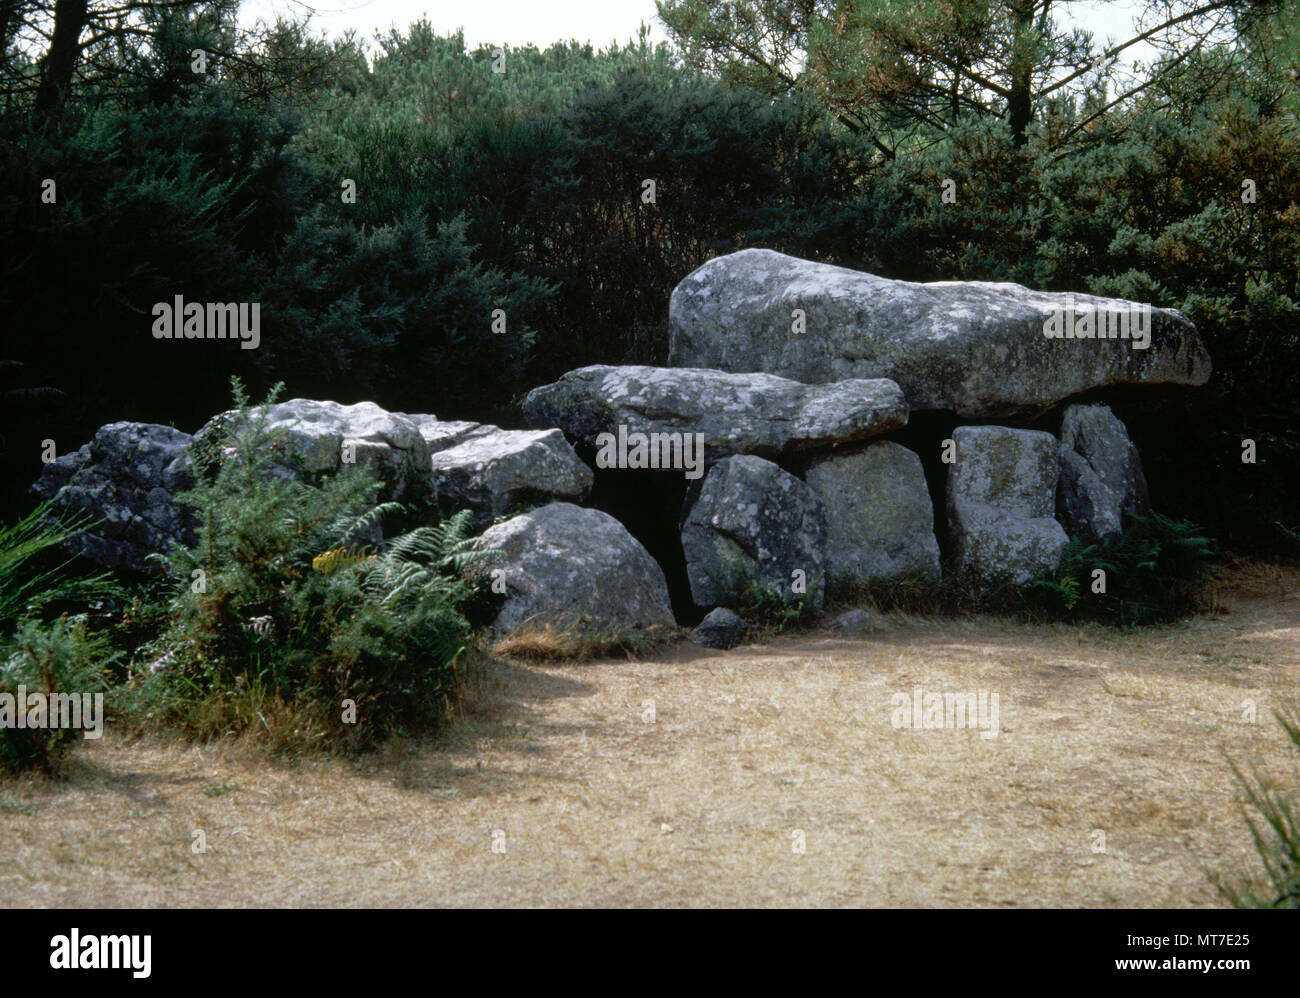 Dolmens of Mane-Kerioned (Pixies' mound). 3500 BC. Carnac stones. Megalithic era. Morbihan department, Carnac commune, Brittany, France. Stock Photo